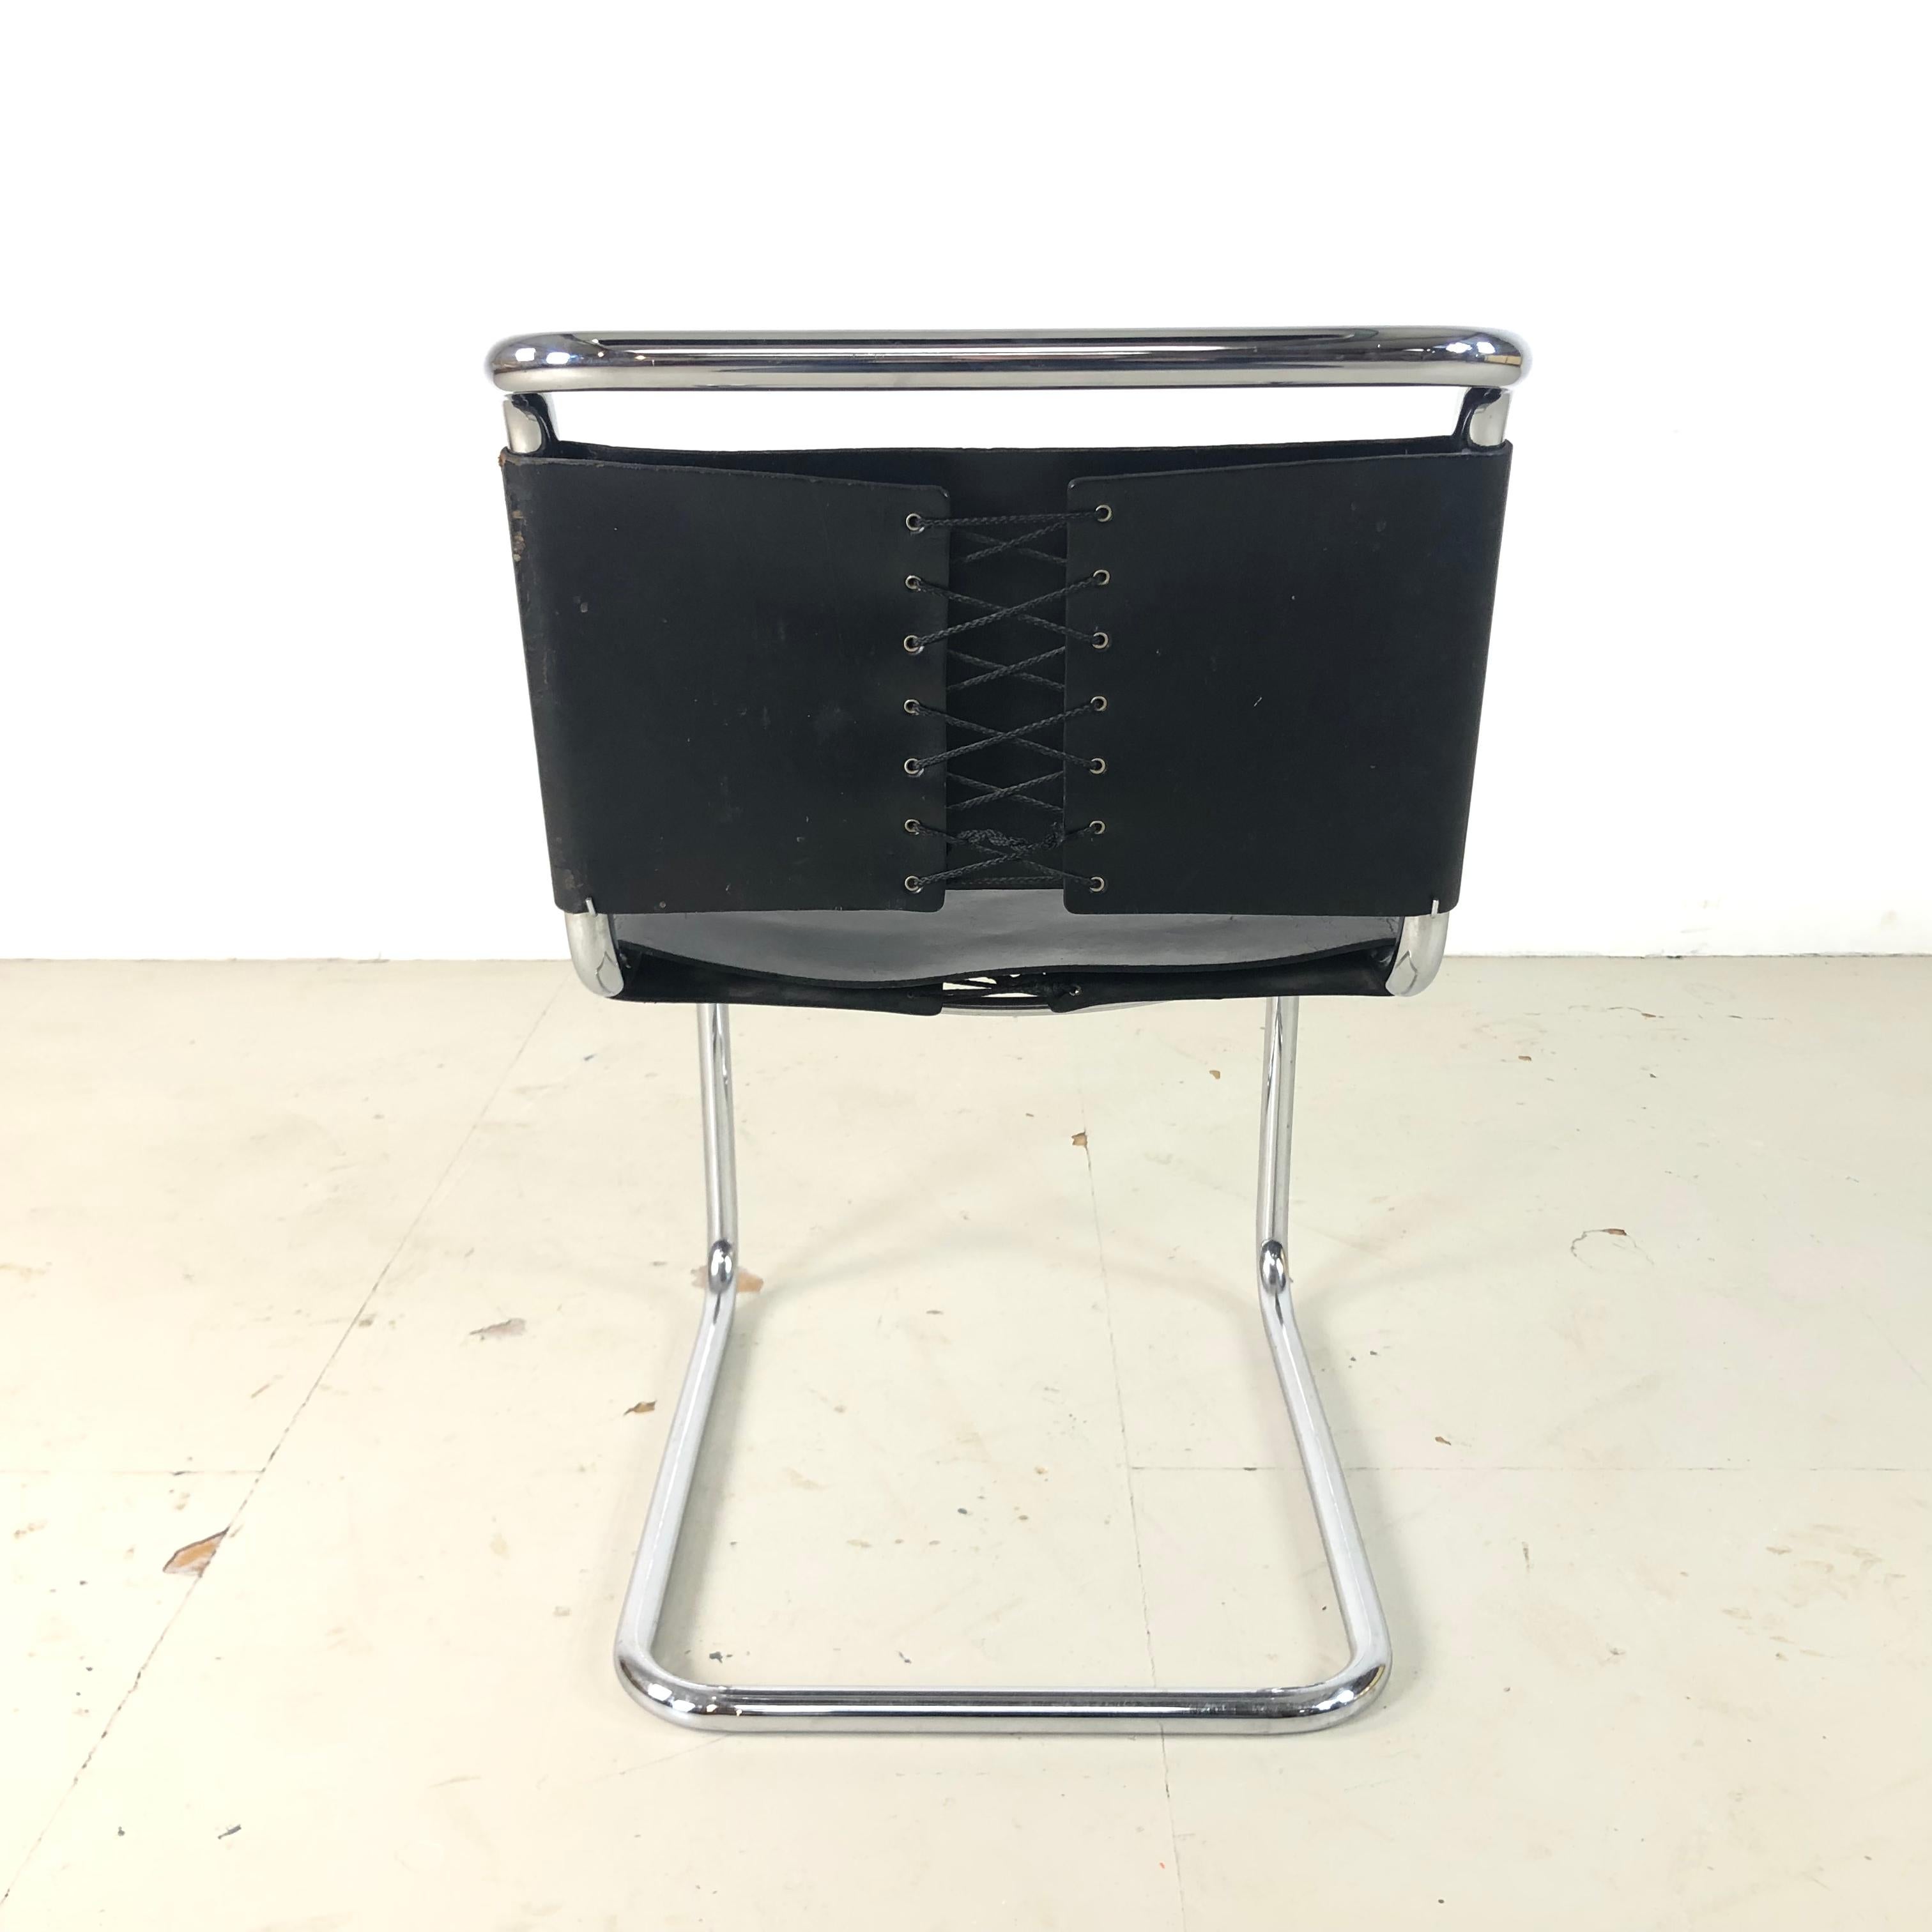 Marcel Breuer style cantilever chair. Lovely as a desk chair.

Tubular frame with black leather seat. 

In good vintage condition. Some wear and tear, commensurate with age, but nothing which detracts.

Approximate dimensions:

Height